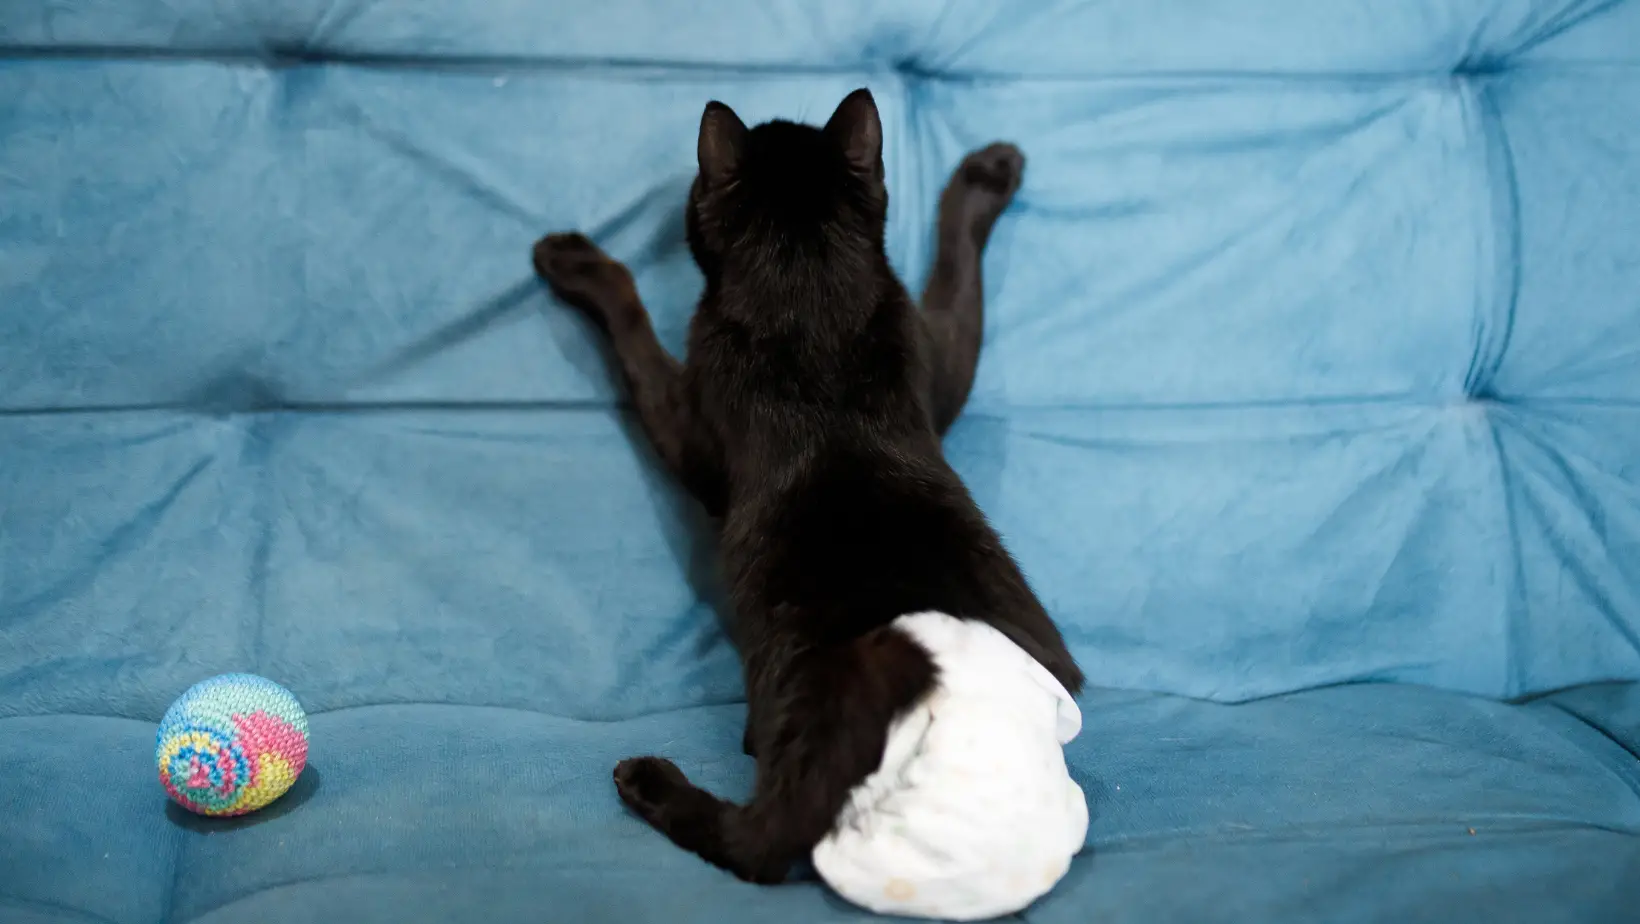 Can Cats Wear Diapers?